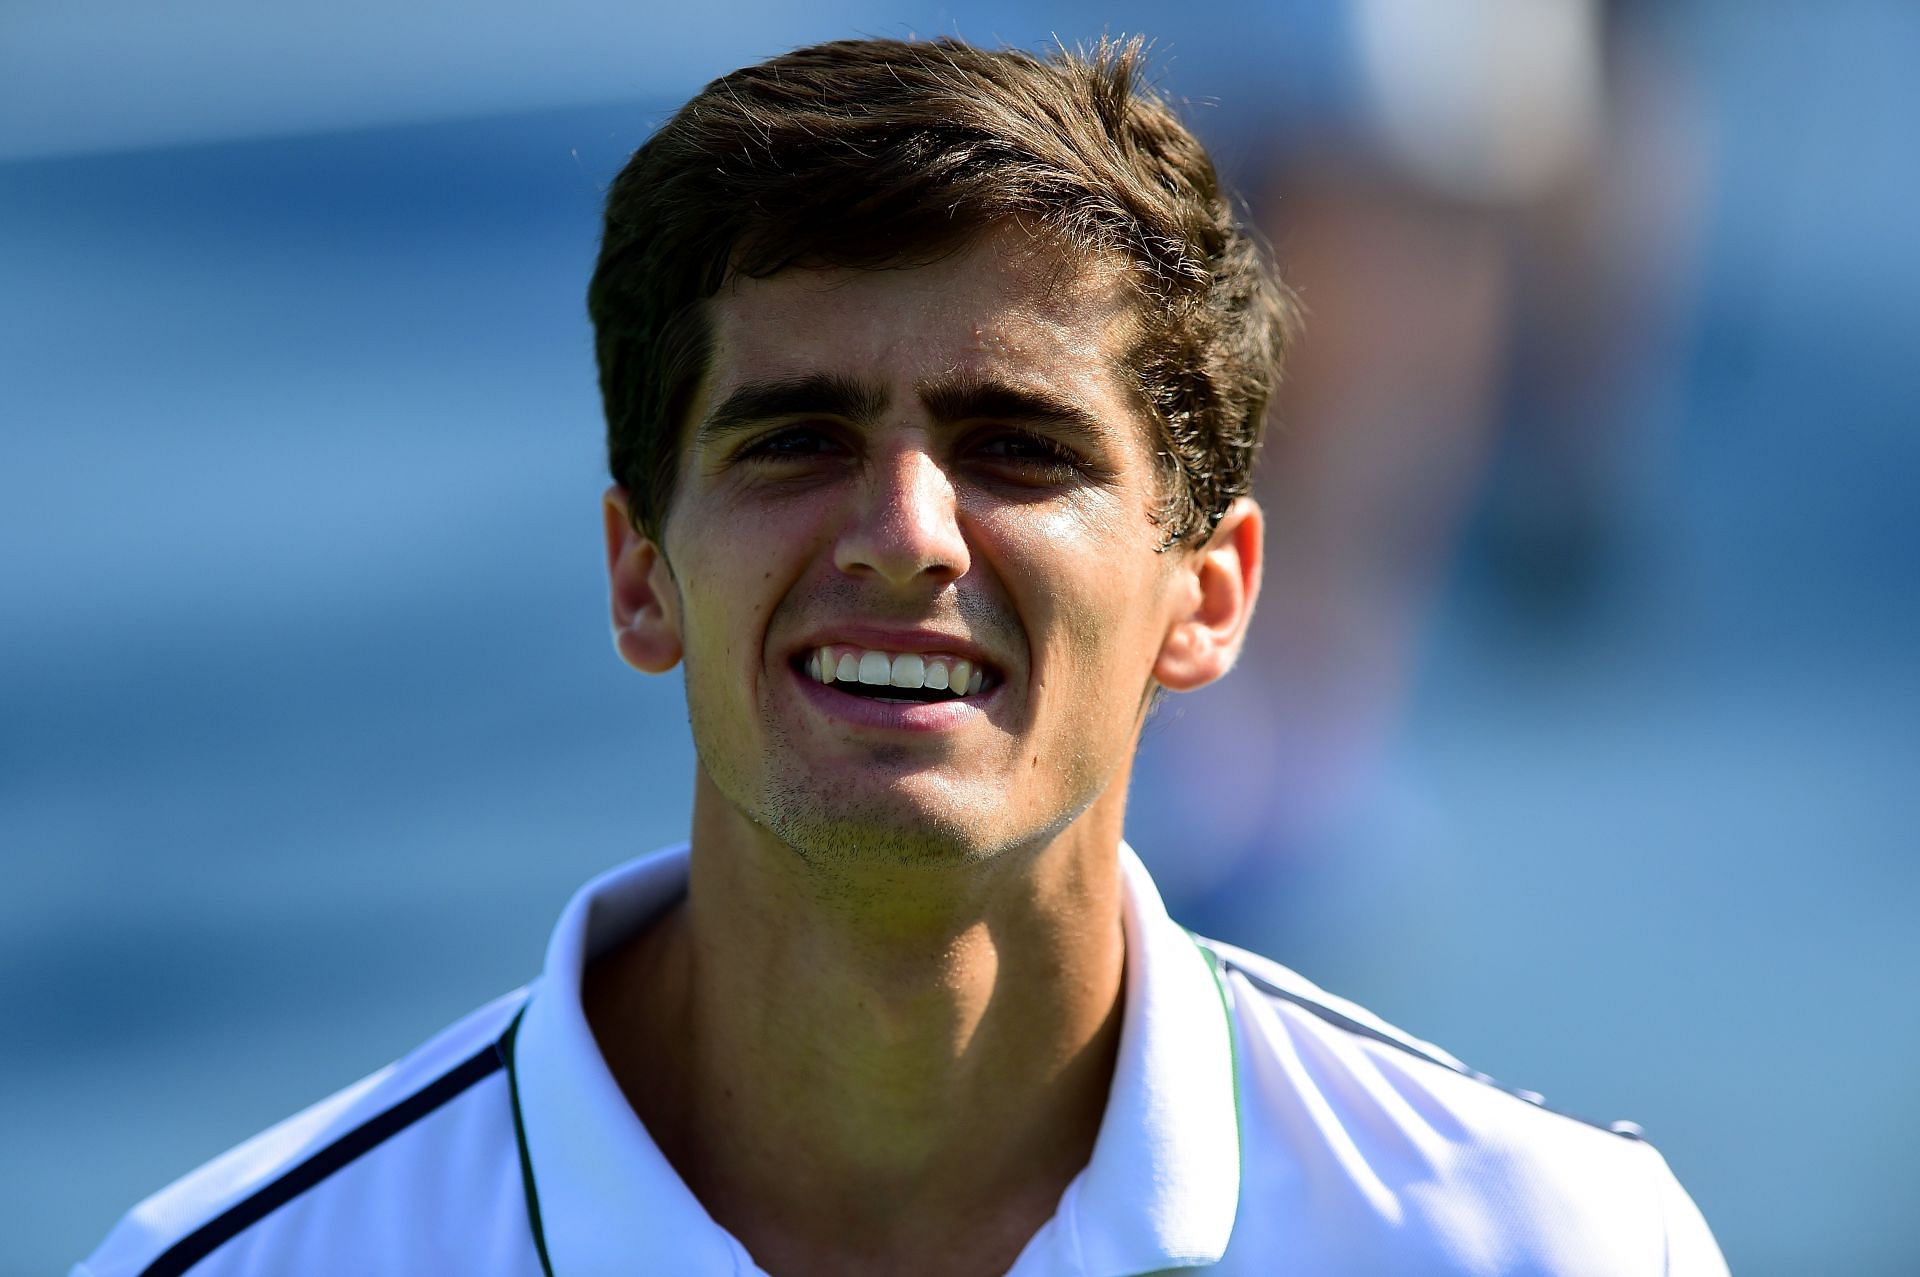 Pierre-Hugues Herbert was the first tennis player to opt out of the 2022 Australian Open